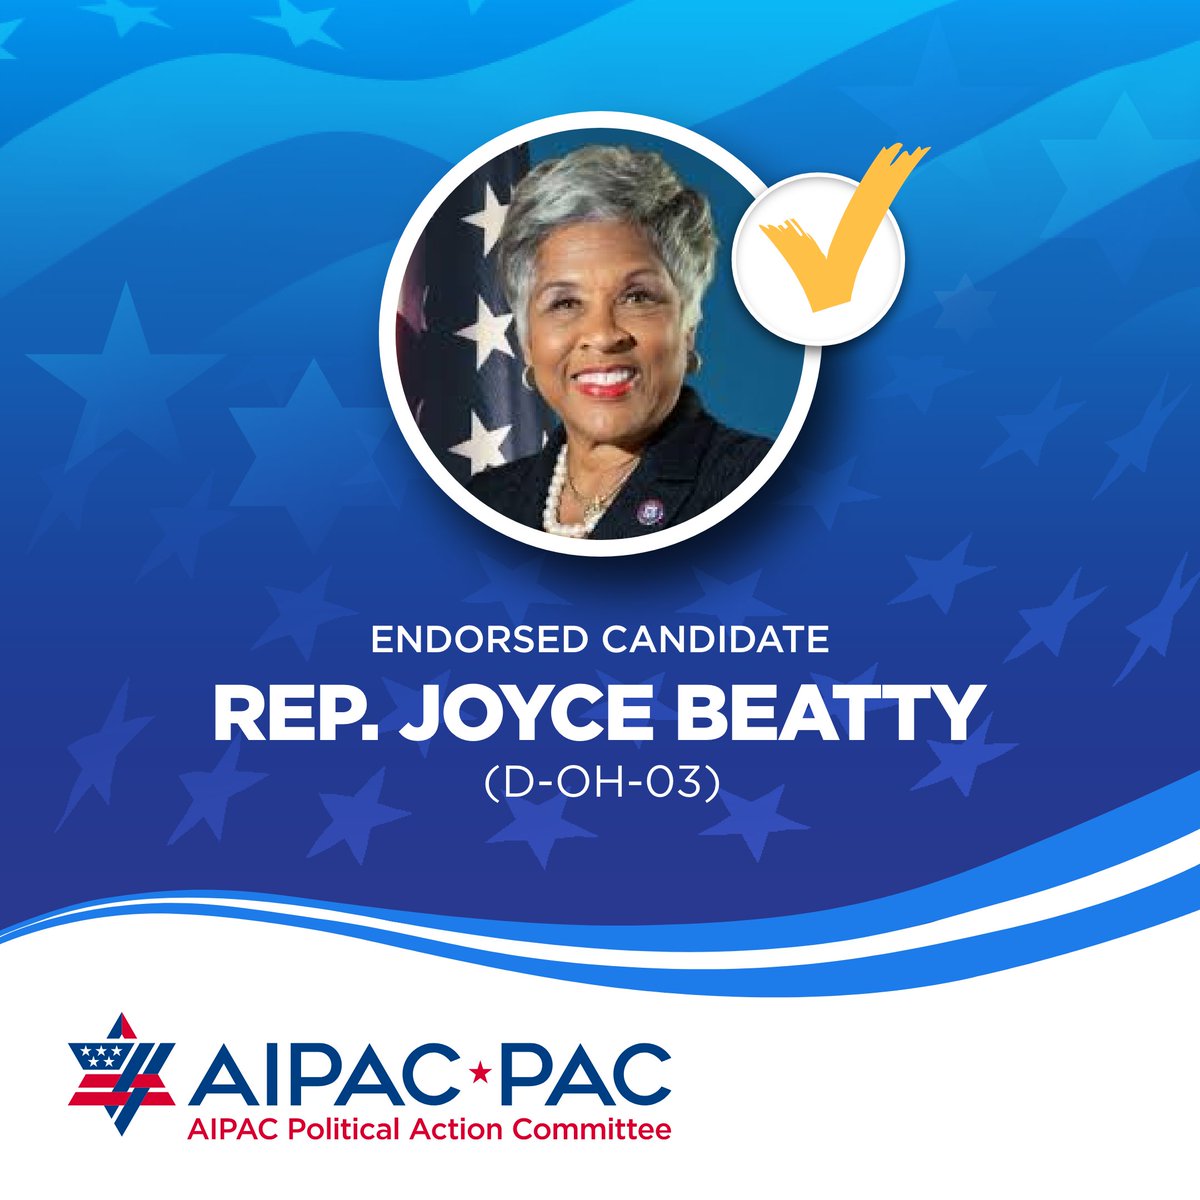 Congratulations to AIPAC-endorsed @Jim_Jordan and @RepBeatty on your primary election victories! AIPAC is proud to stand with pro-Israel candidates who help strengthen and expand the U.S.-Israel relationship. Being pro-Israel is good policy and good politics.